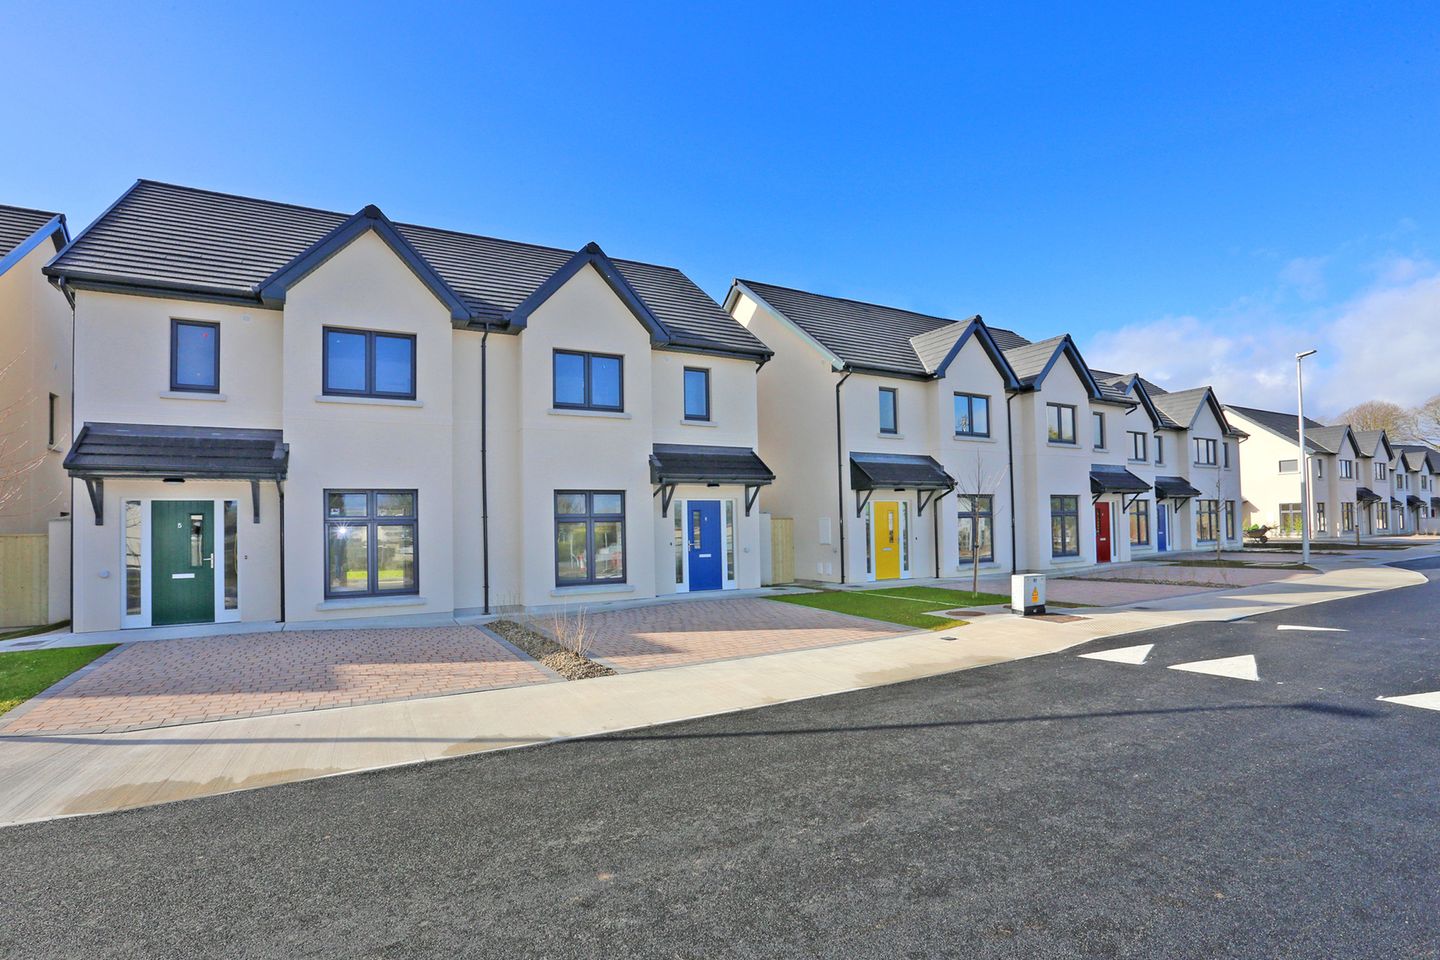 Type F - 3 Bed Mid / End Terrace, An Tobar, Type F - 3 Bed Mid / End Terrace, An Tobar, Patrickswell, Co. Limerick